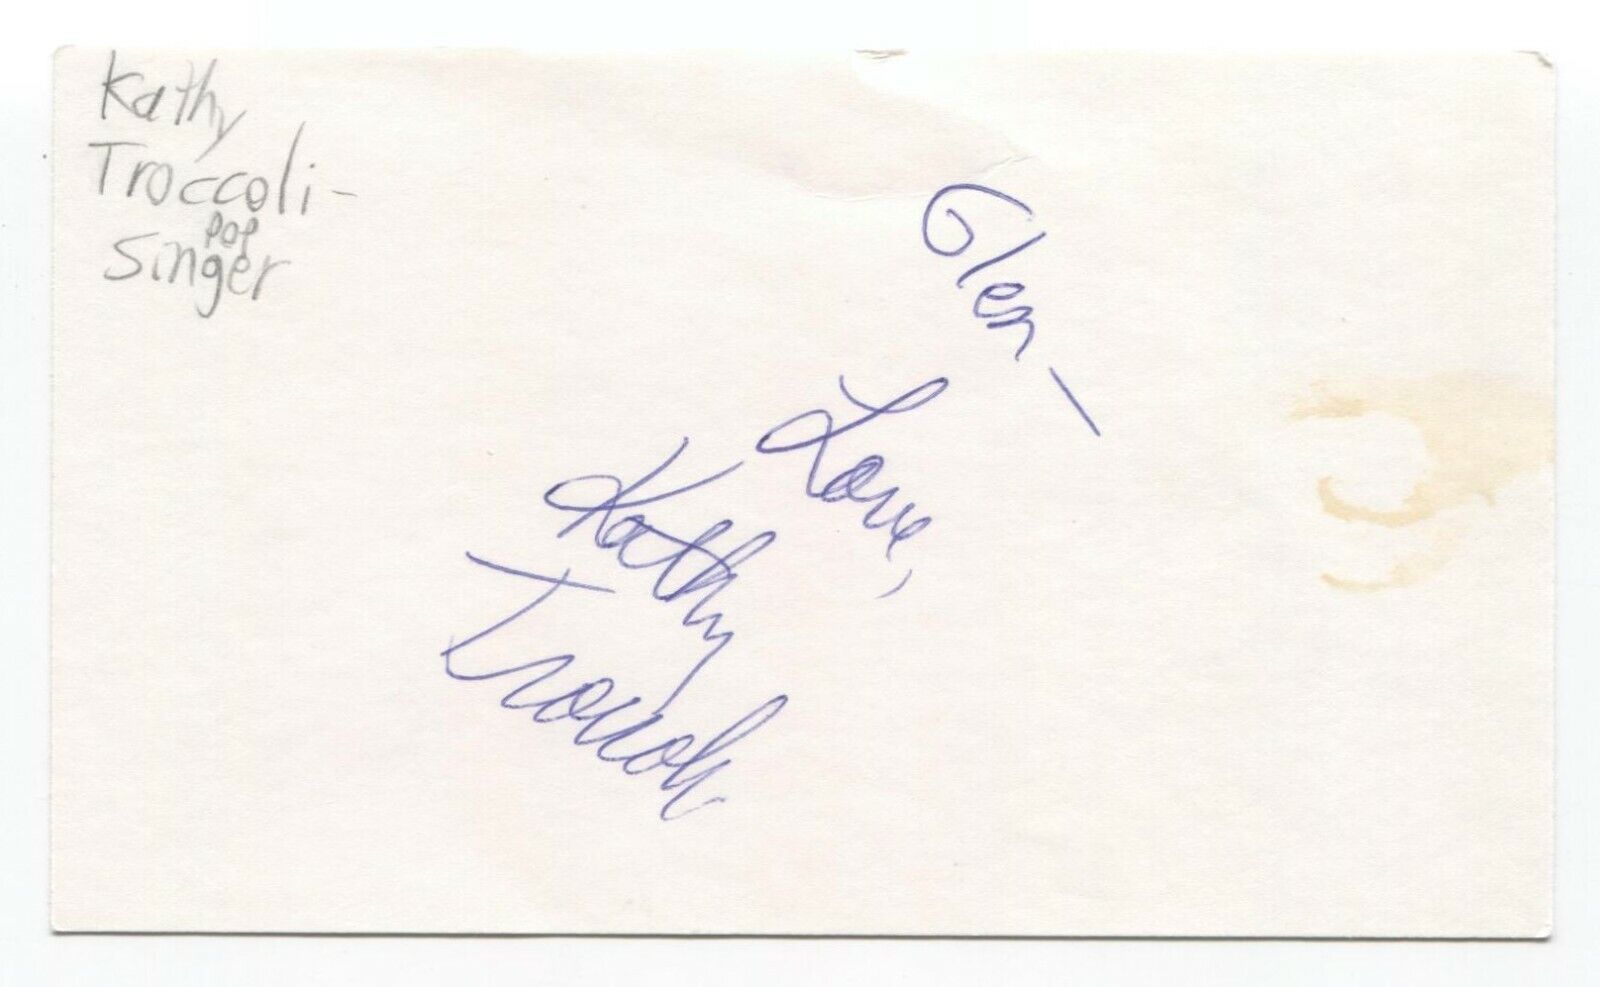 Kathy Troccoli Signed 3x5 Index Card Autographed Signature Singer